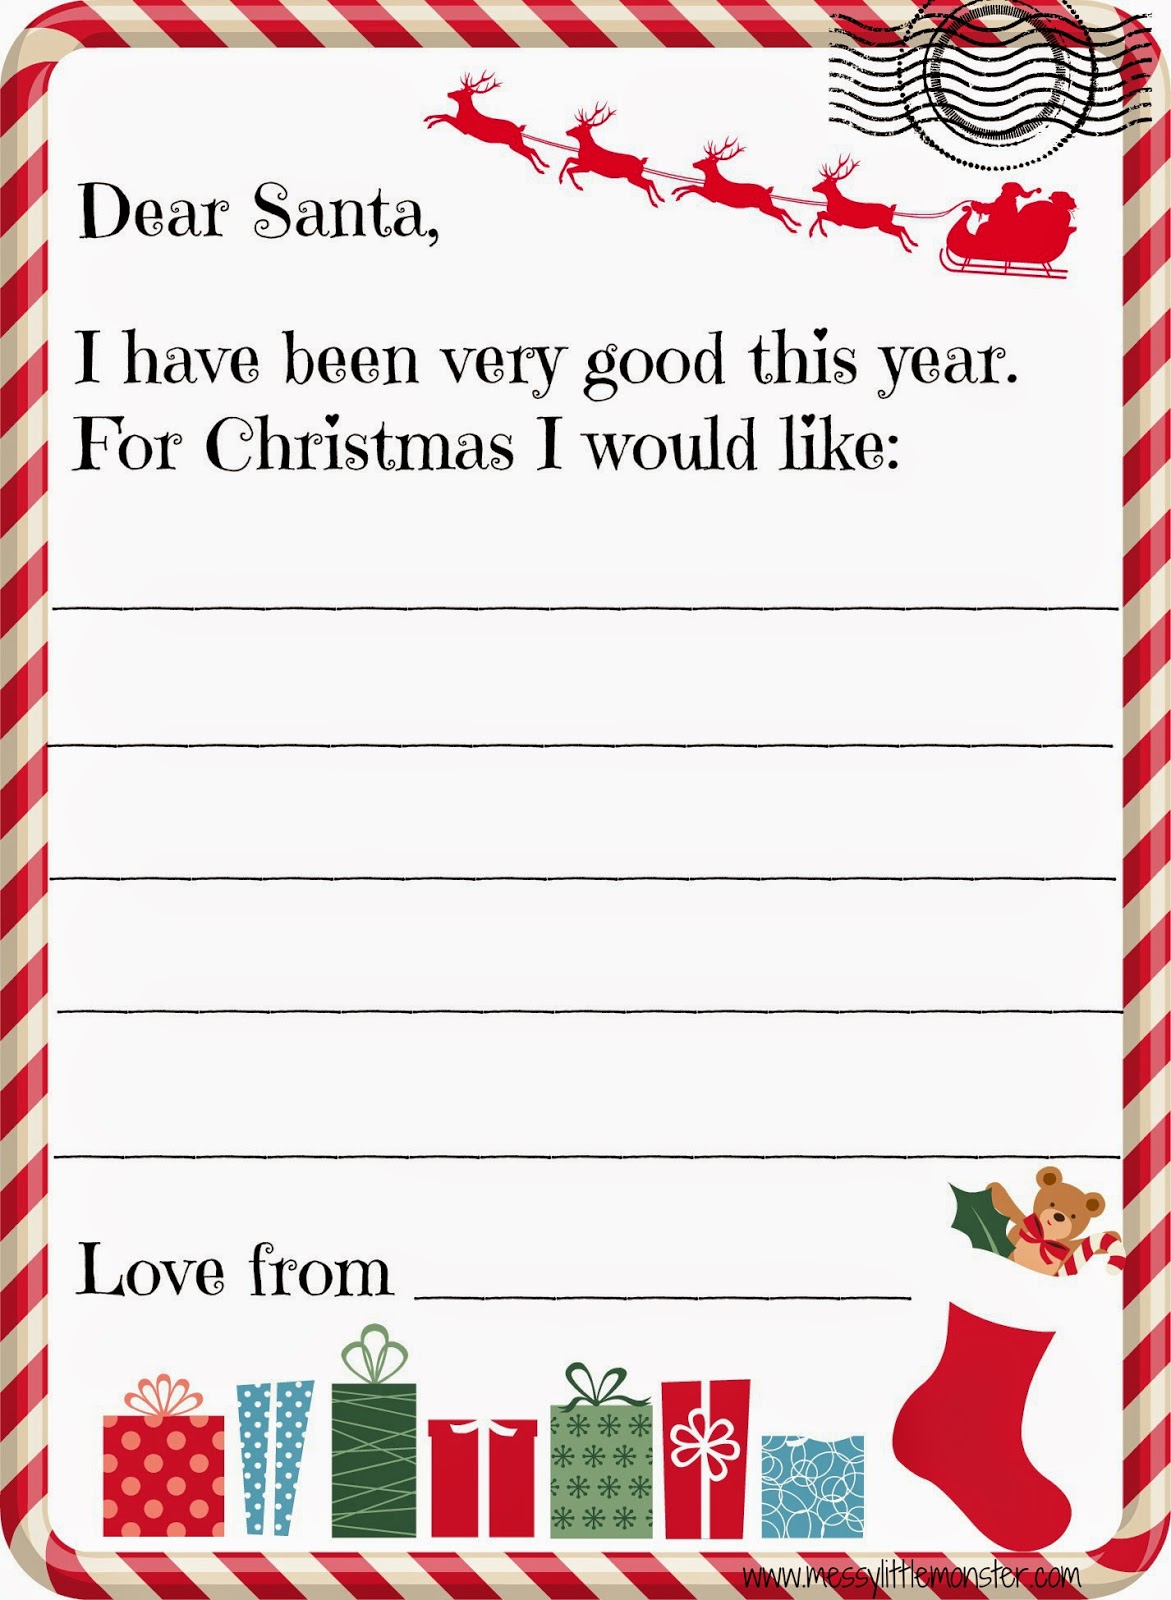 Santa Letter Printable Template The Templates Are In An Easy To Use Pdf ...